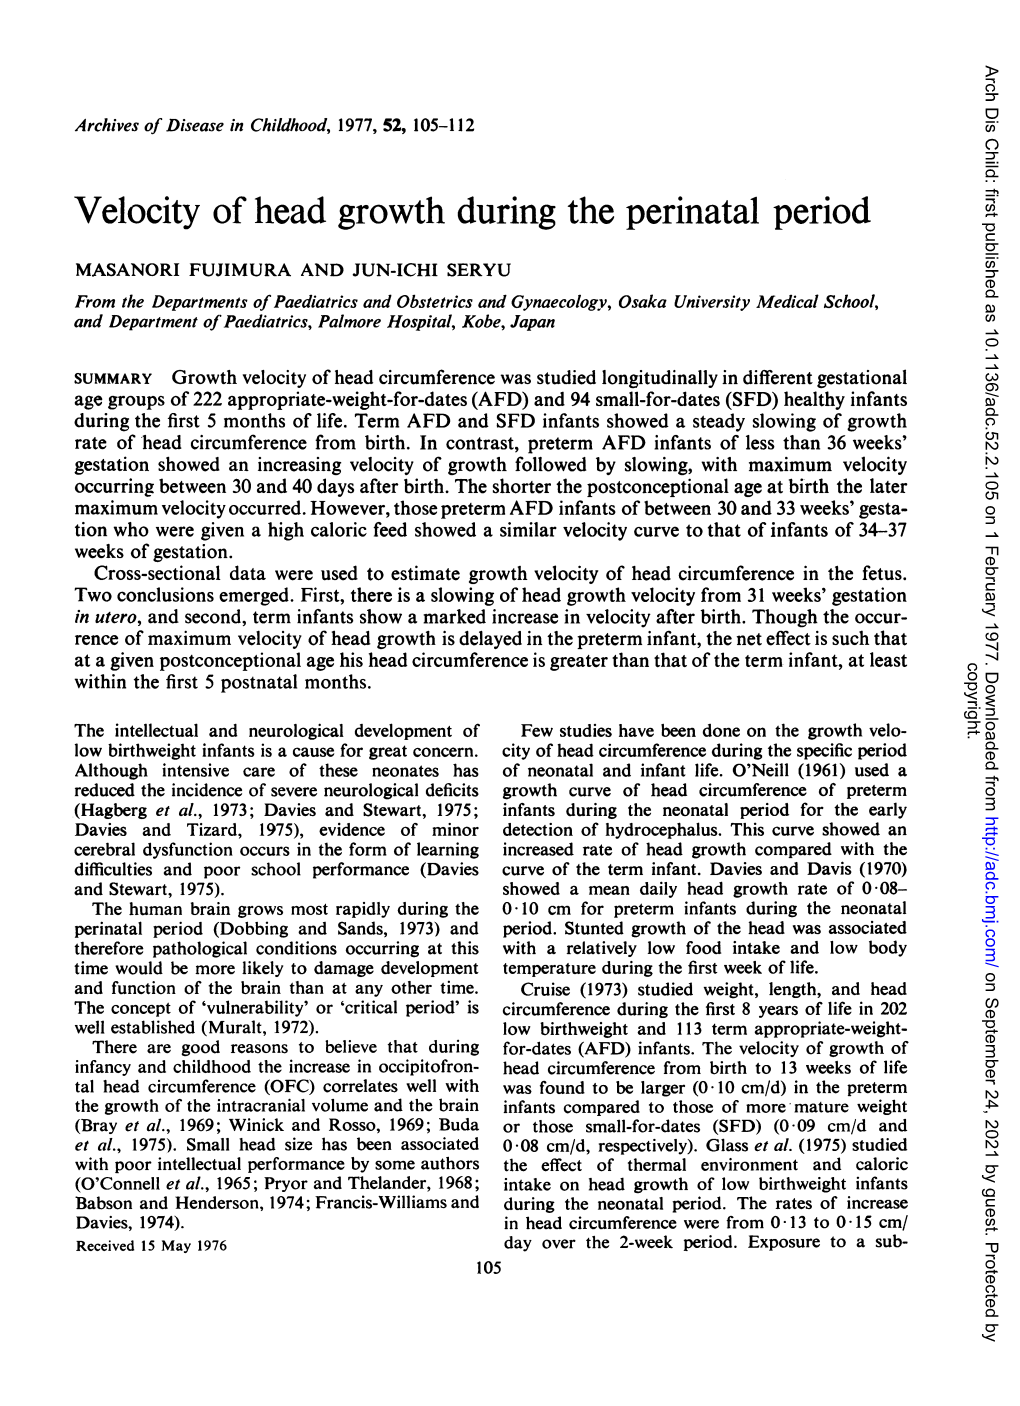 Velocity of Head Growth During the Perinatal Period